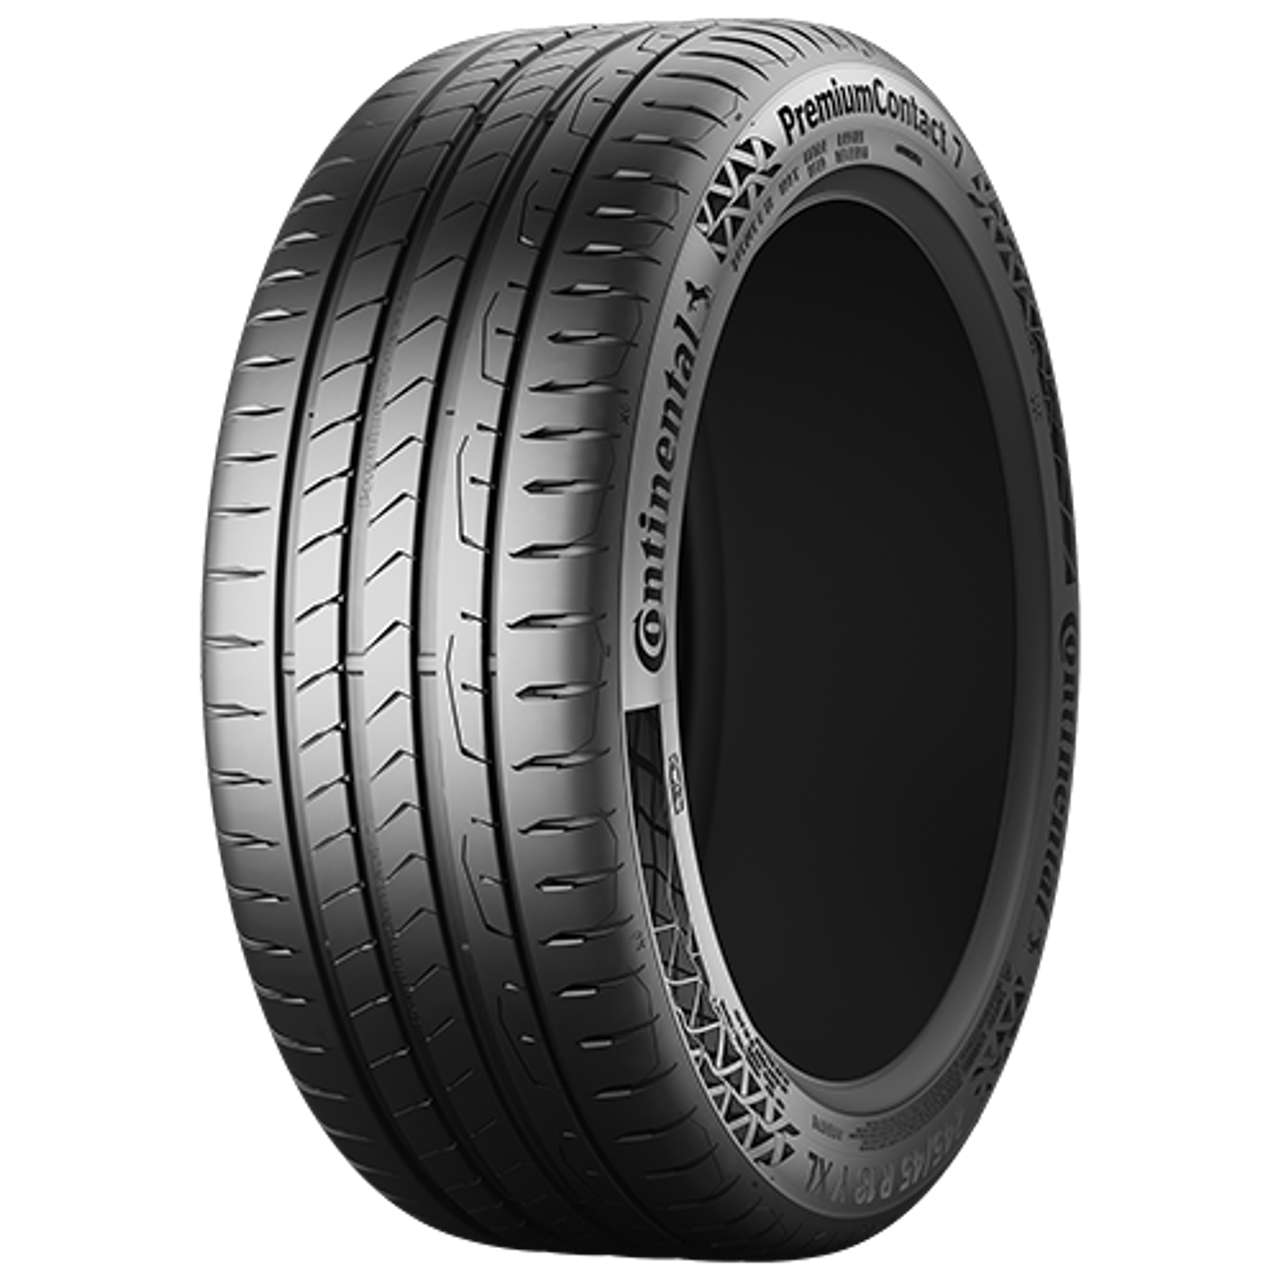 CONTINENTAL PREMIUMCONTACT 7 (EVc) 225/45R17 91V FR BSW